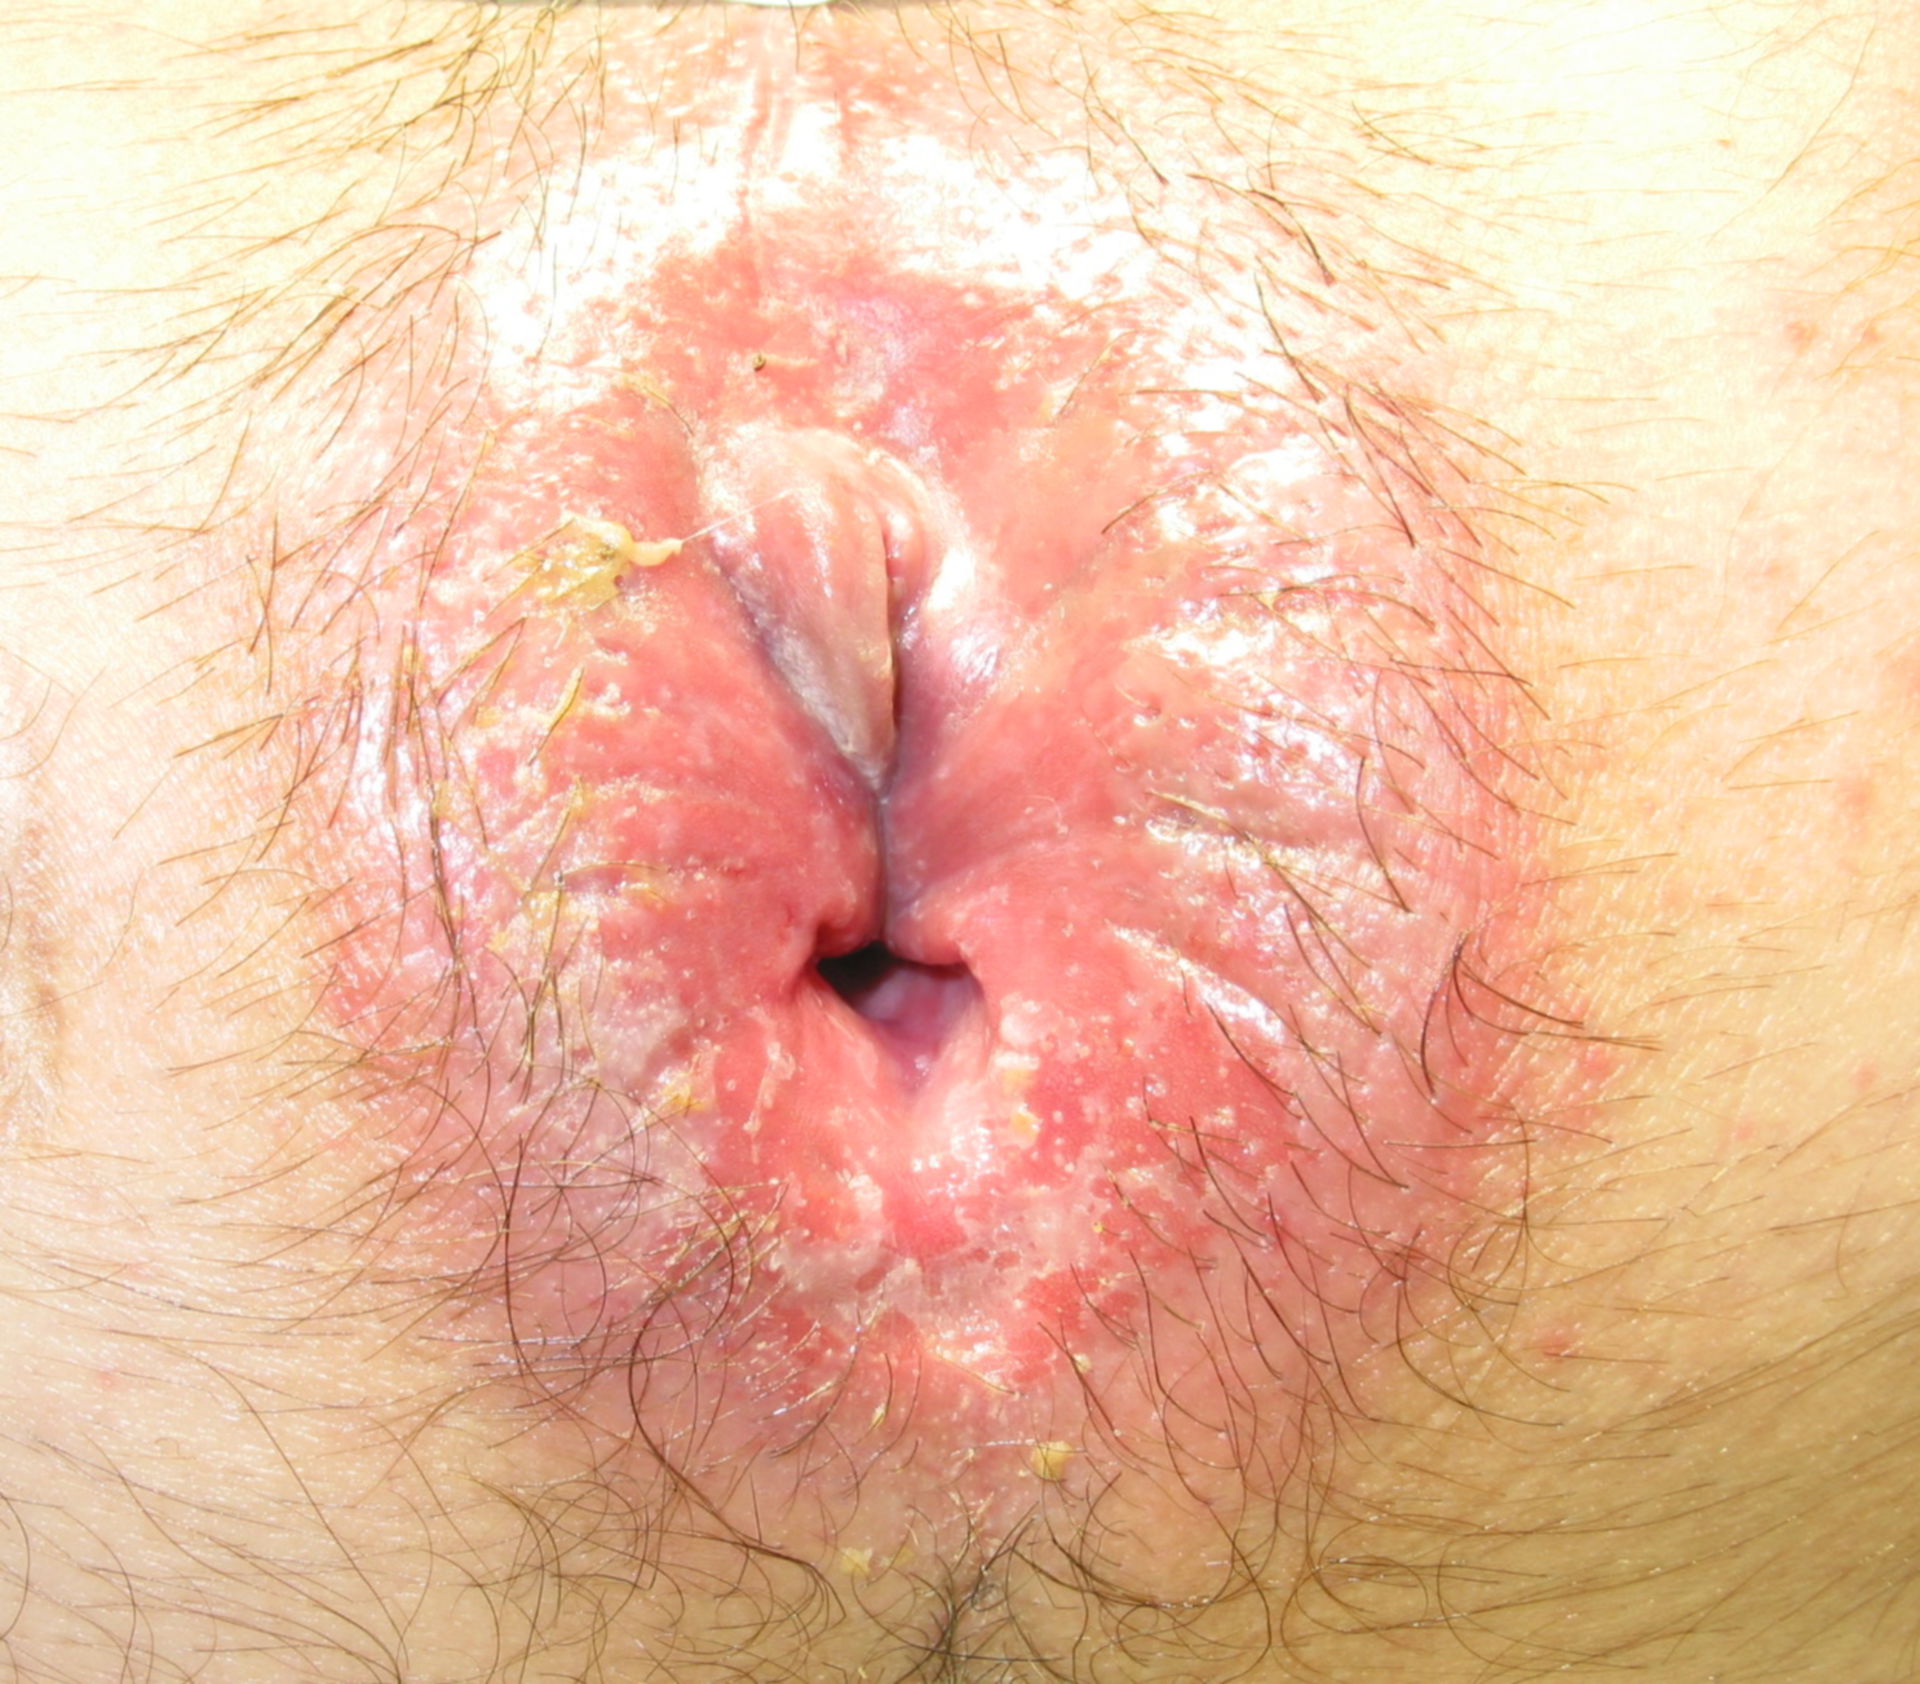 Anal eczema and fissure